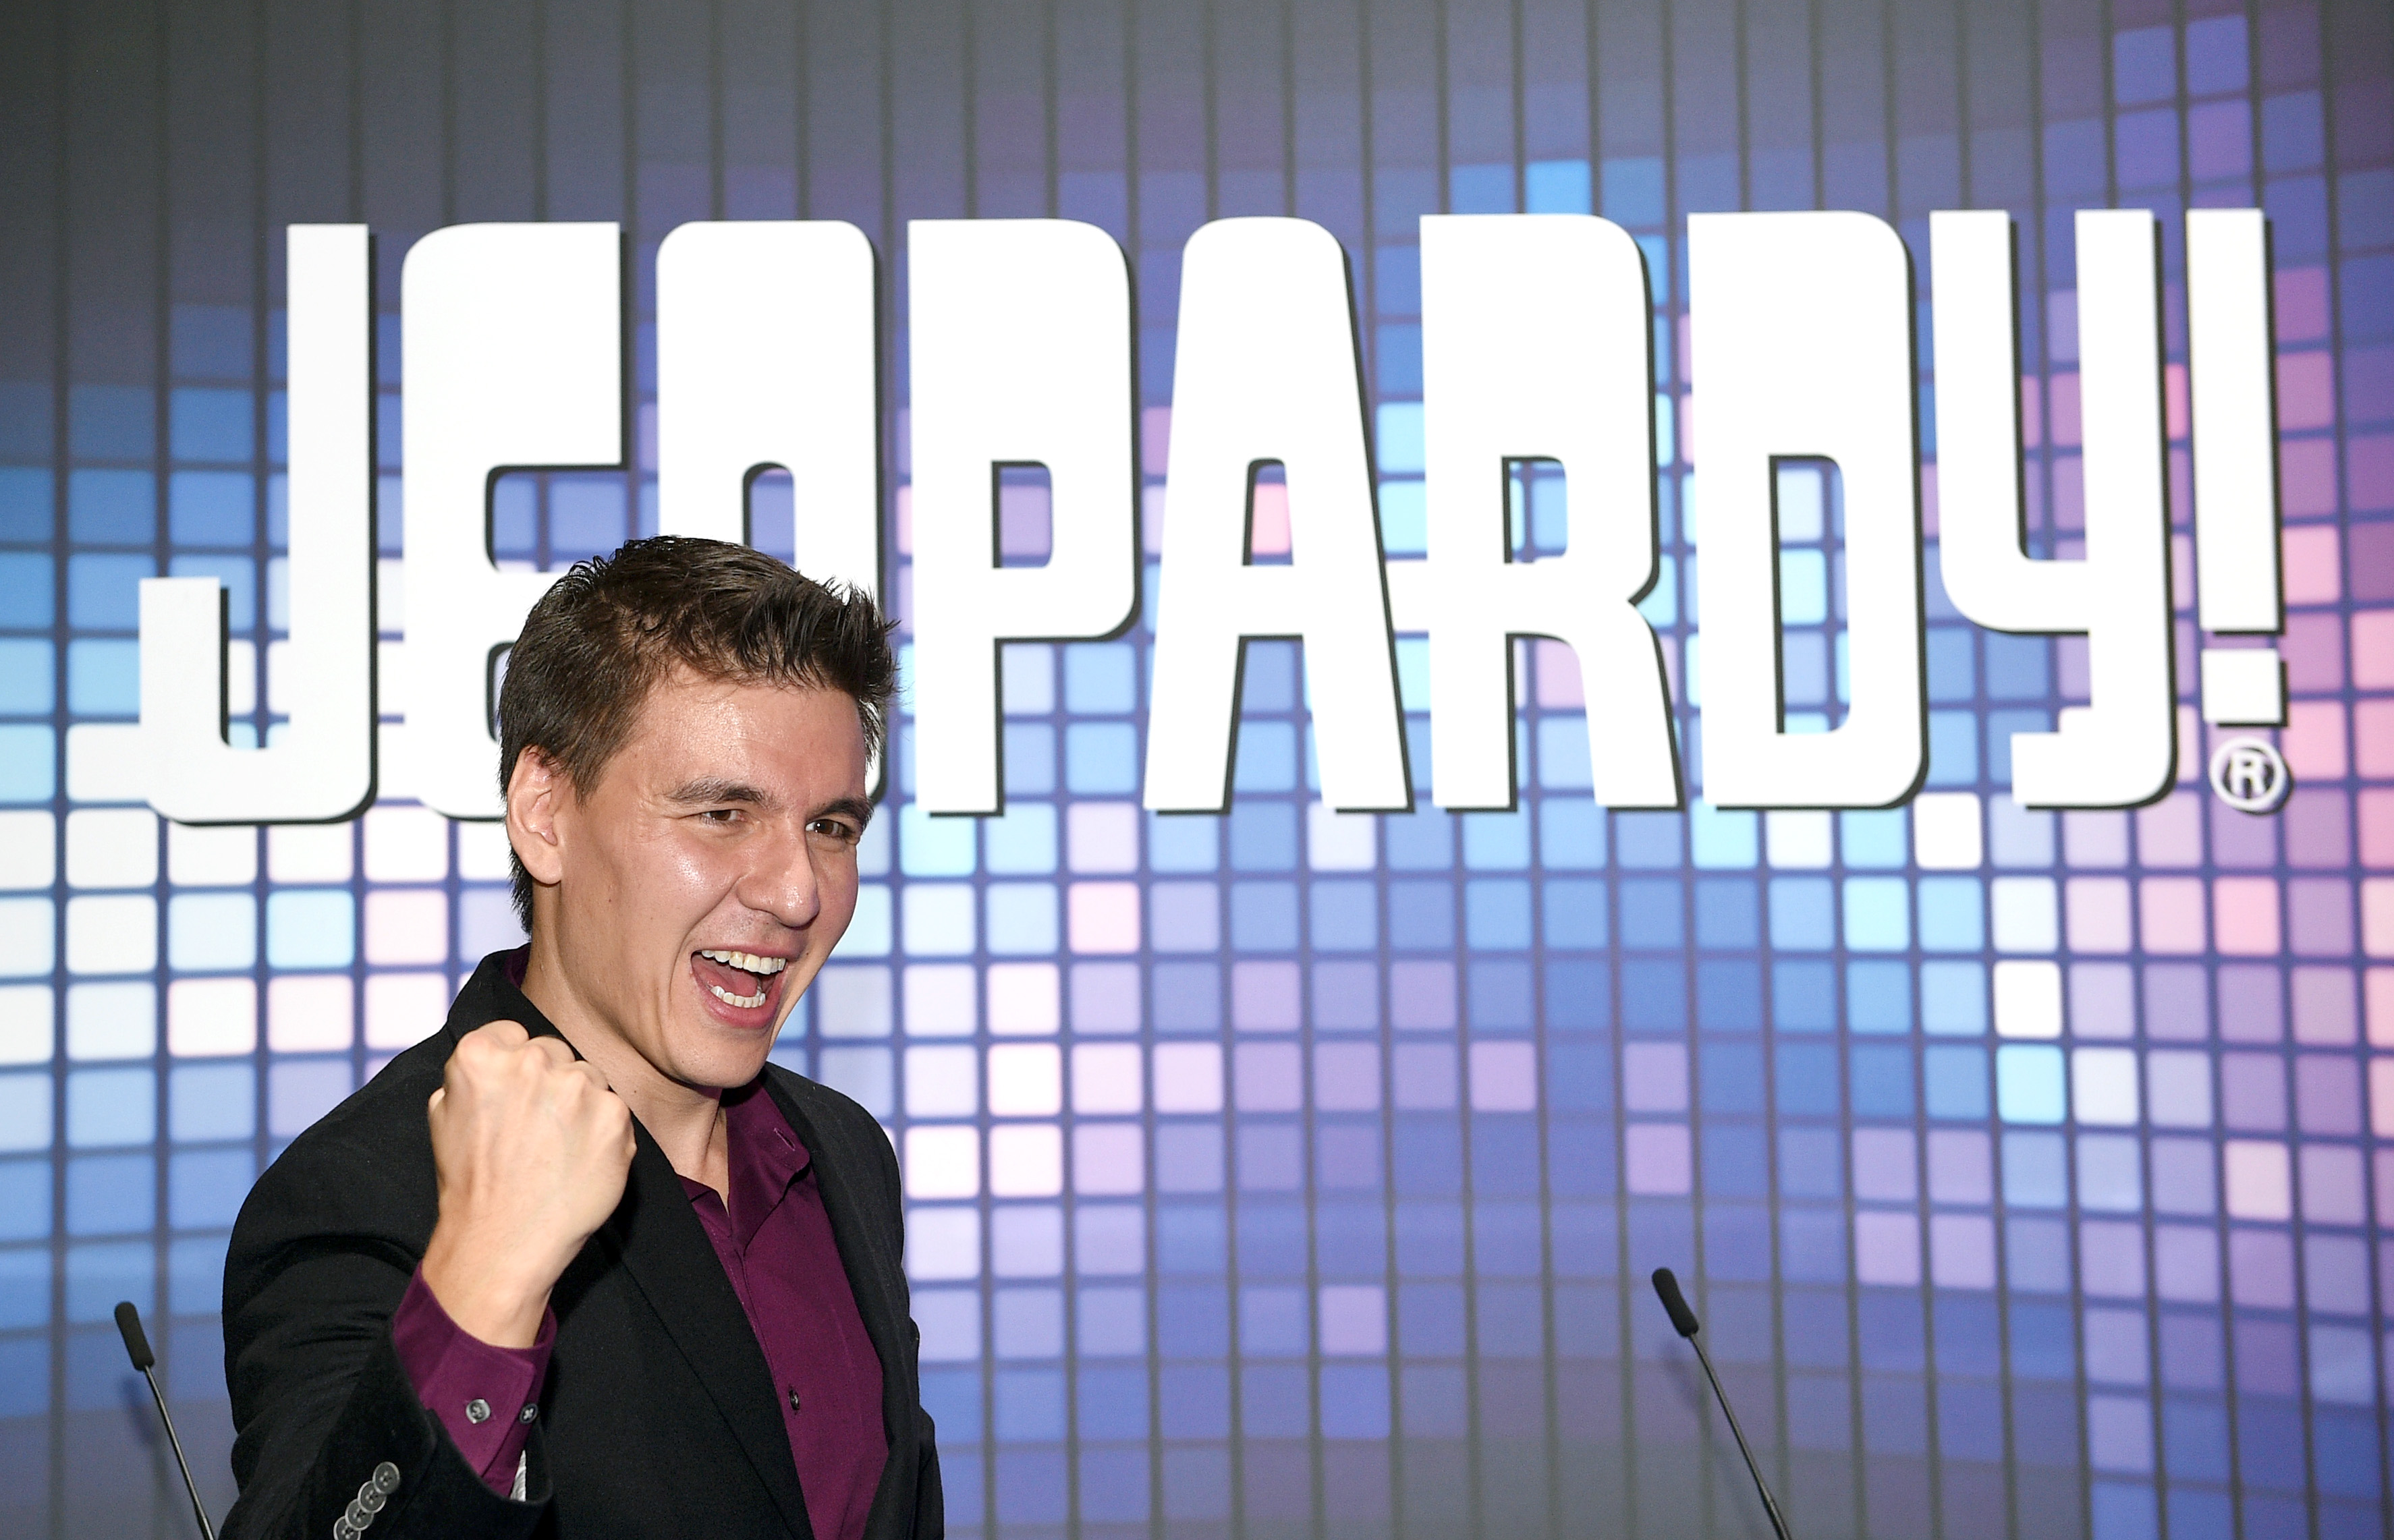 Professional sports gambler and former 'Jeopardy!' champion James Holzhauer poses at the IGT booth during the trade show debut of two 'Jeopardy!'-themed IGT slot machines during the Global Gaming Expo (G2E) at the Sands Expo and Convention Center